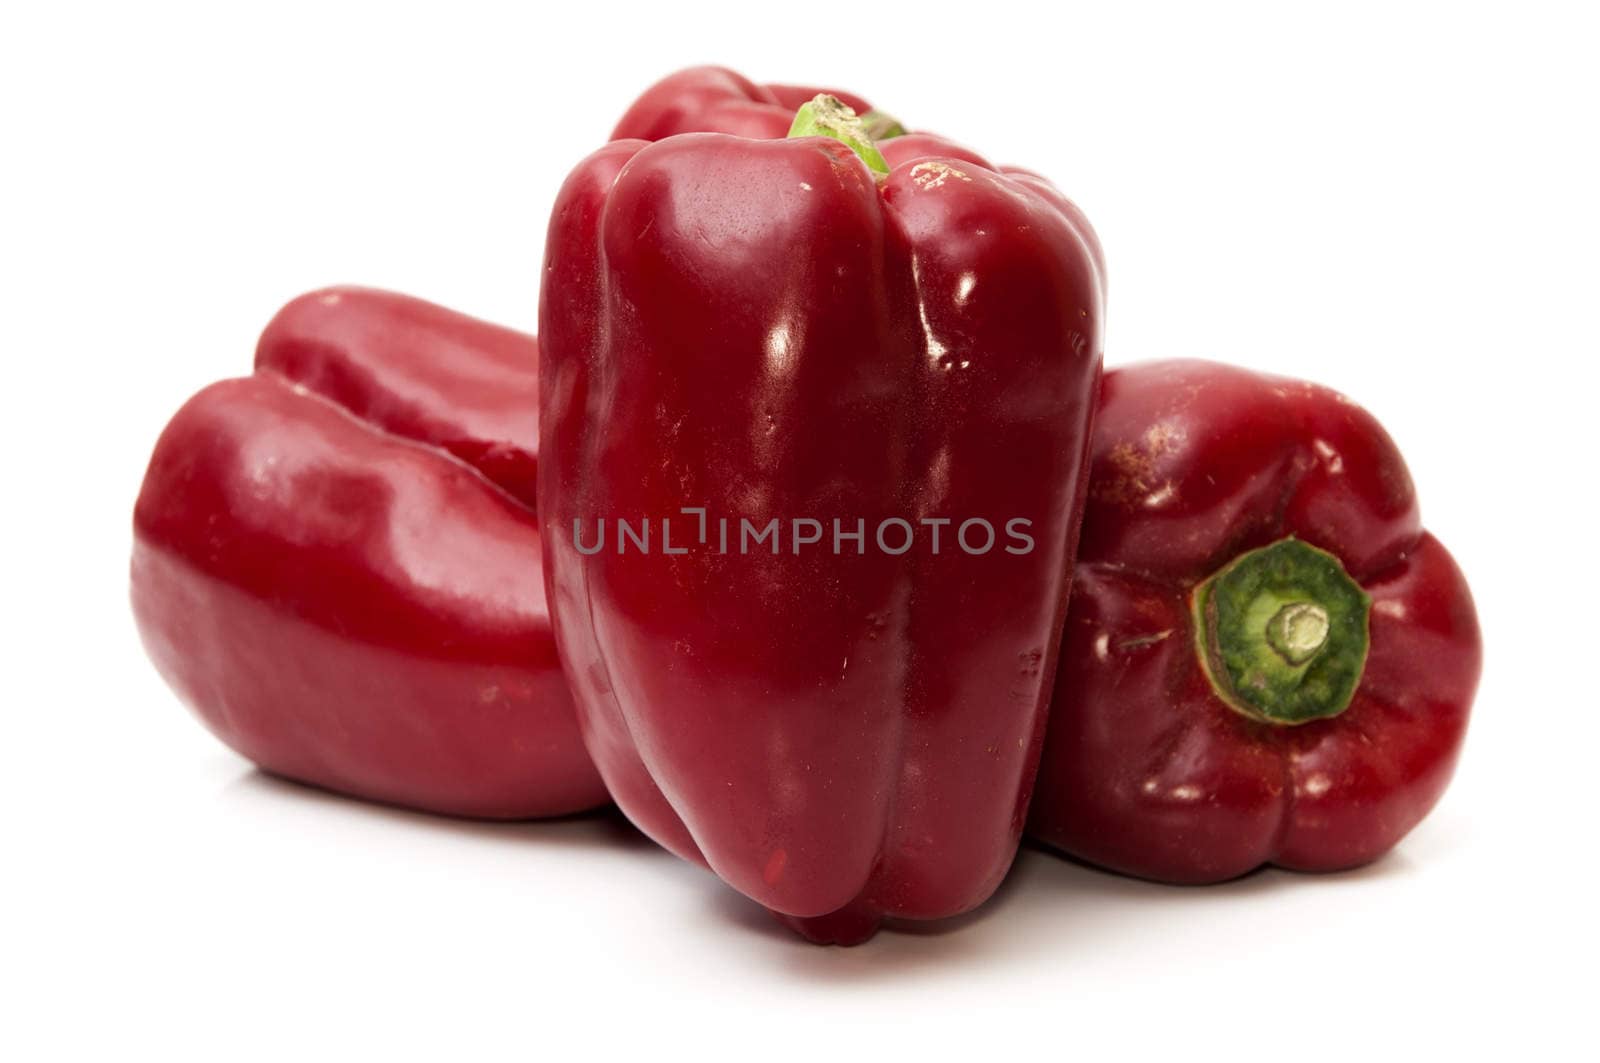 red peppers on a white background